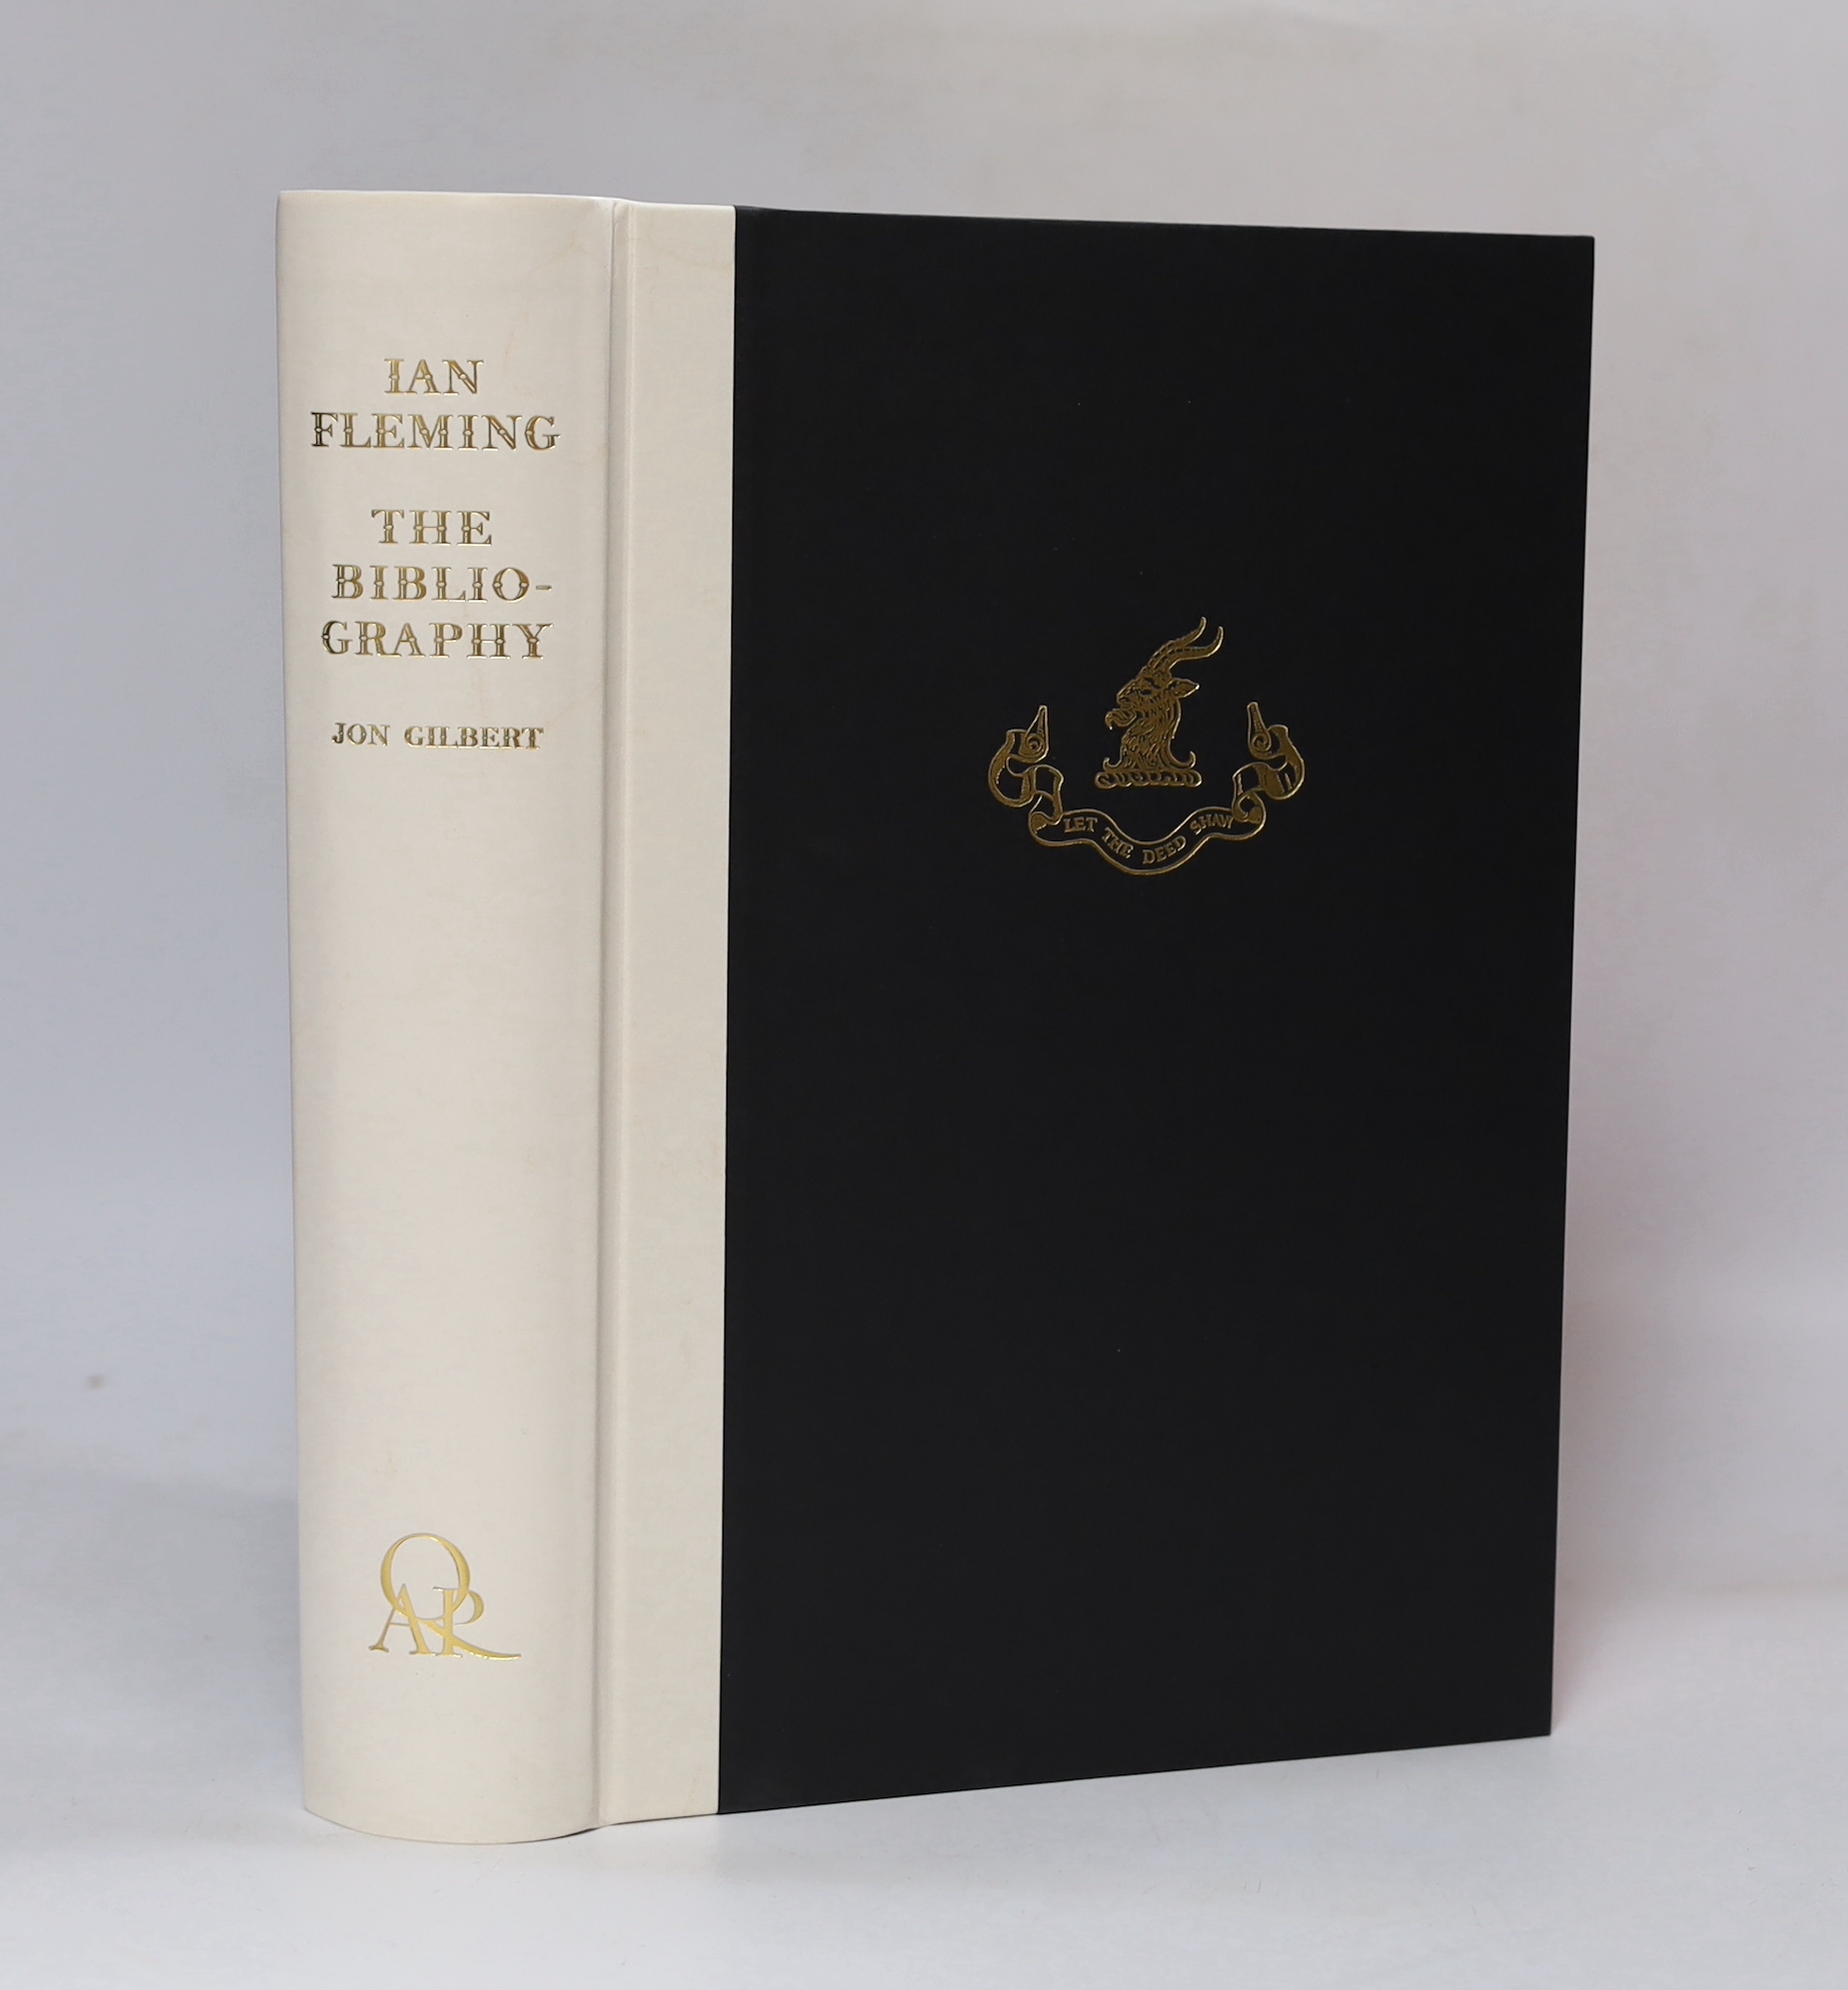 Gilbert, Jon - Ian Fleming: The Bibliography, 1st edition , folio, quarter vellum, portrait frontispiece, colour plates and black and white illustrations to text, Queen Anne Press, London, 2012, in slip case.